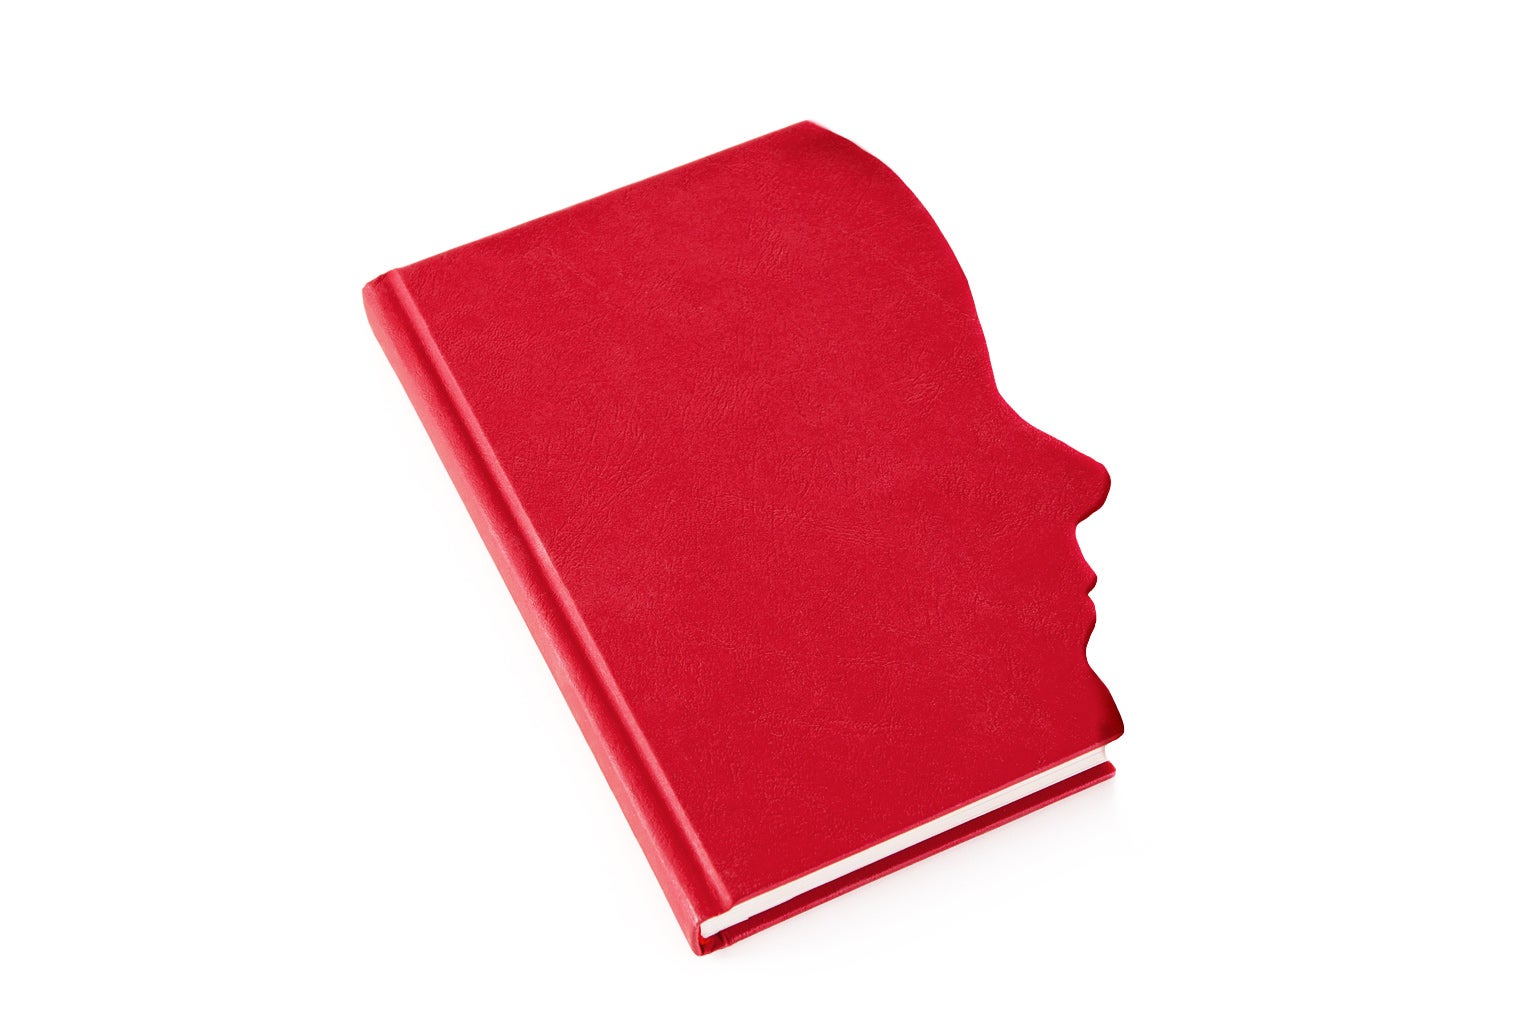 A red book cover with a face in silhouette. 